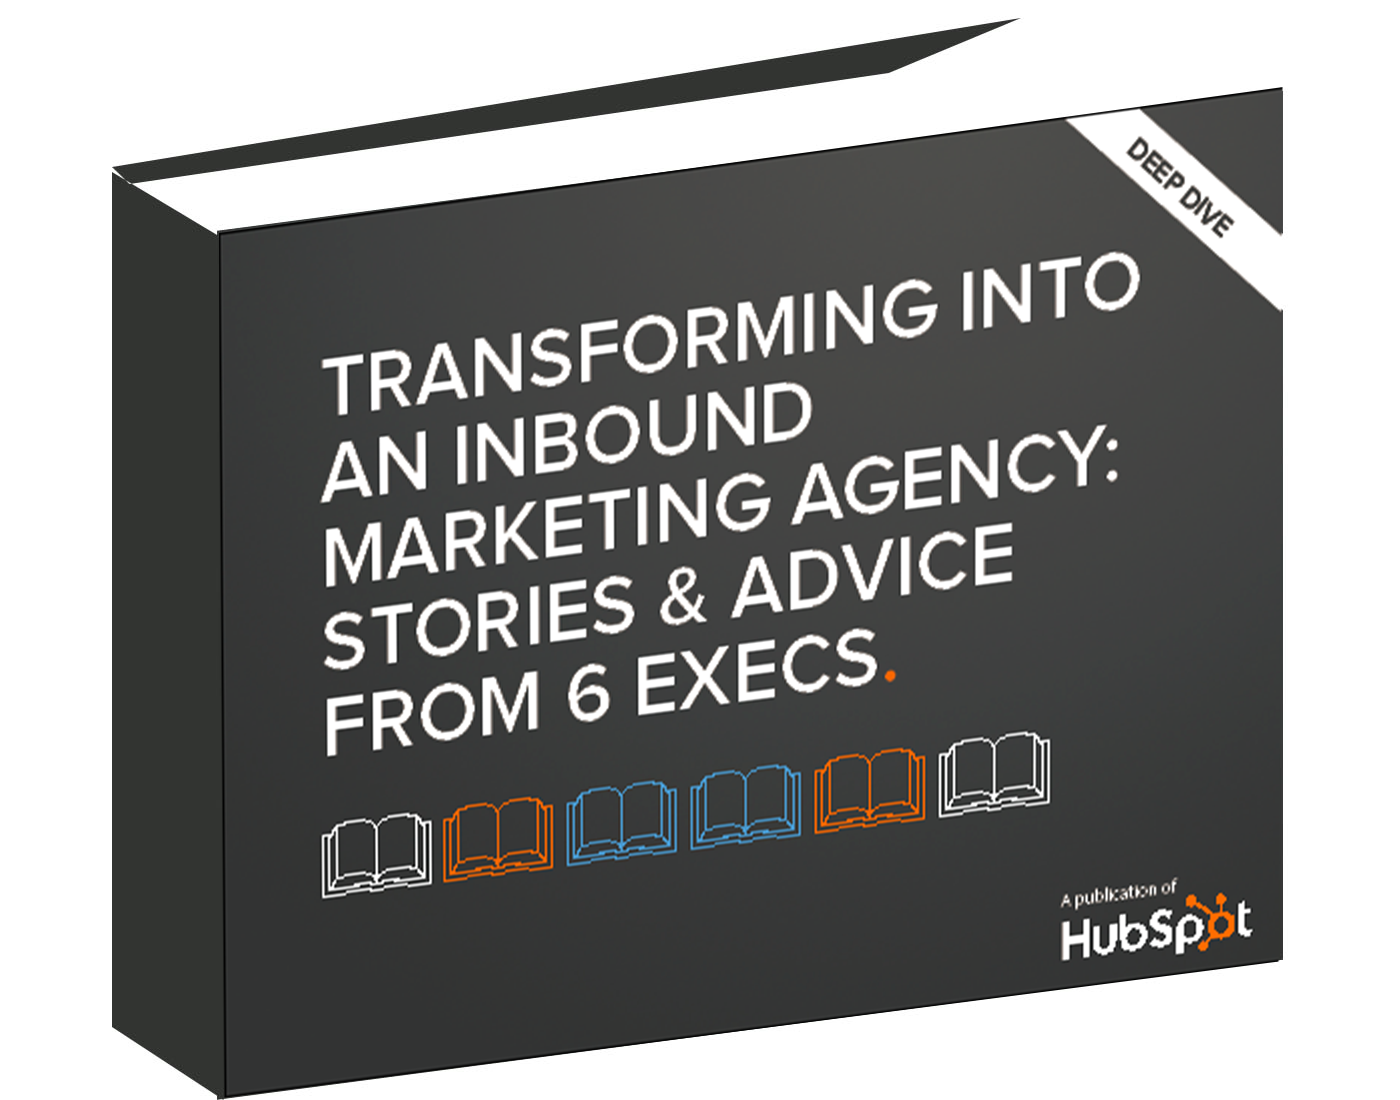 Download the Agency Guide Now!